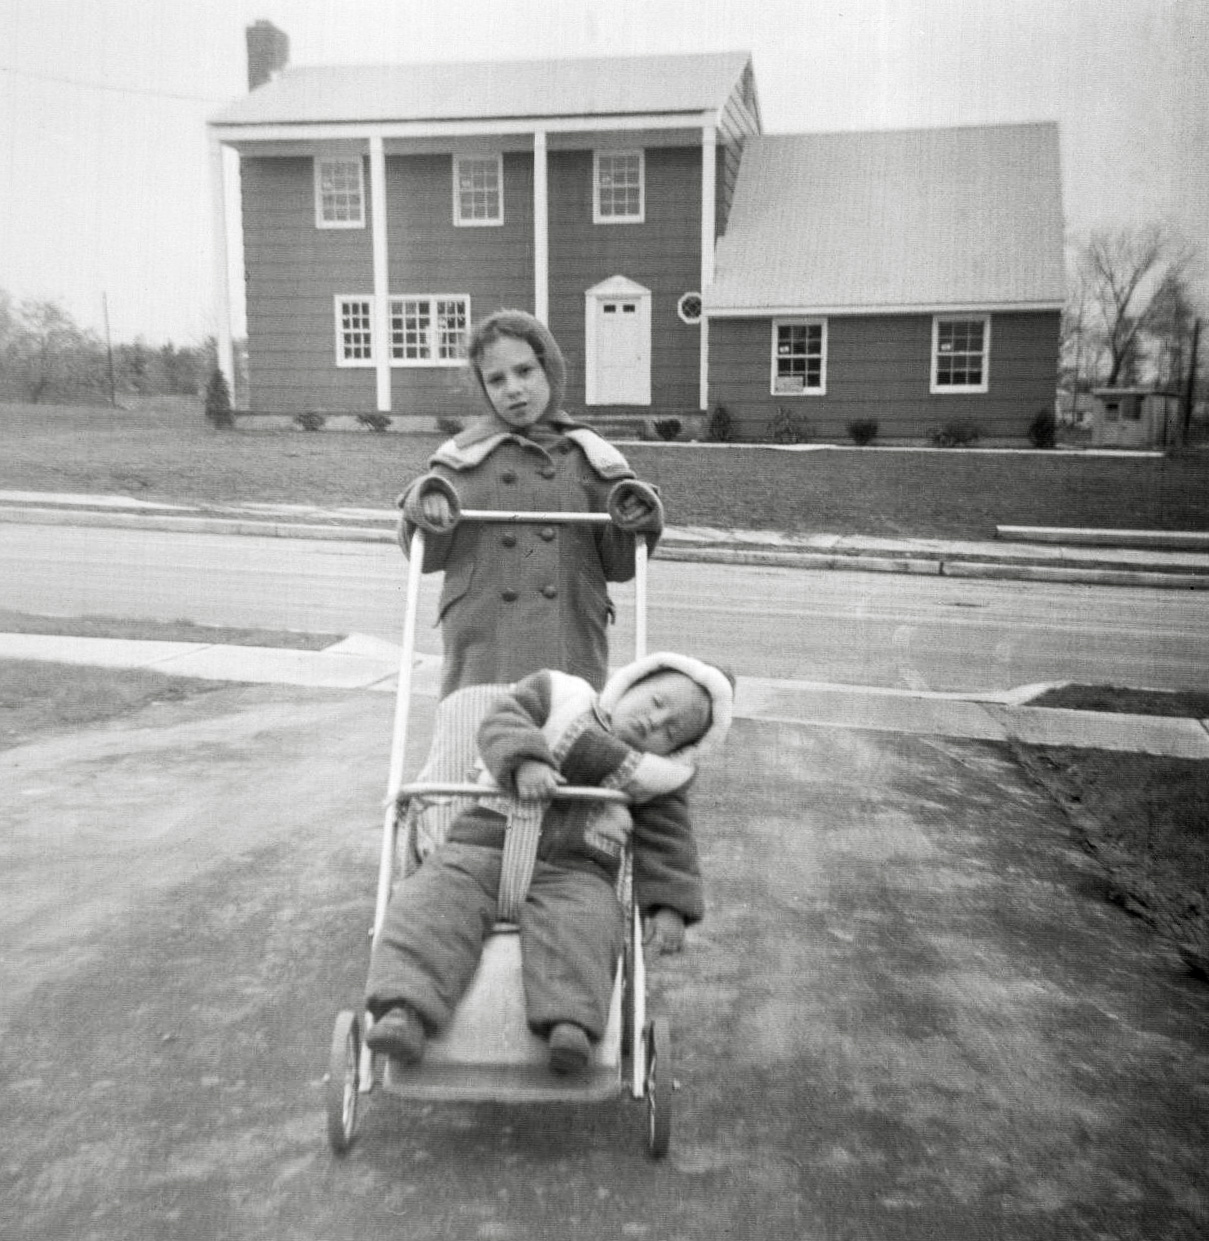 My mother thought it was funny how my baby brother fell asleep in his stroller, so she posed me with it and took this picture. The date is early 1963, around six months after we moved into our new Princeton, New Jersey house. 
Like in Levittown, my family were the original owners, though unlike Levittown, these were custom-built homes. You selected your lot, then selected a blueprint from the library of blueprints that the builder had. The blueprint was just a starting point. You then edited those basic plans. In our case we added footage to the garage to fit our 1960 Edsel, because the garage, as drawn in the plans, was shorter than the car. Closet configurations were another thing my mother totally customized.

The just-completed, though not yet occupied house across the street stands starkly in the background with its not-yet-grown landscape and bare lawn area. As for me, I seem to be stoically putting up with my mother’s photography.”Say cheese” was not a phrase in my family’s vocabulary.
